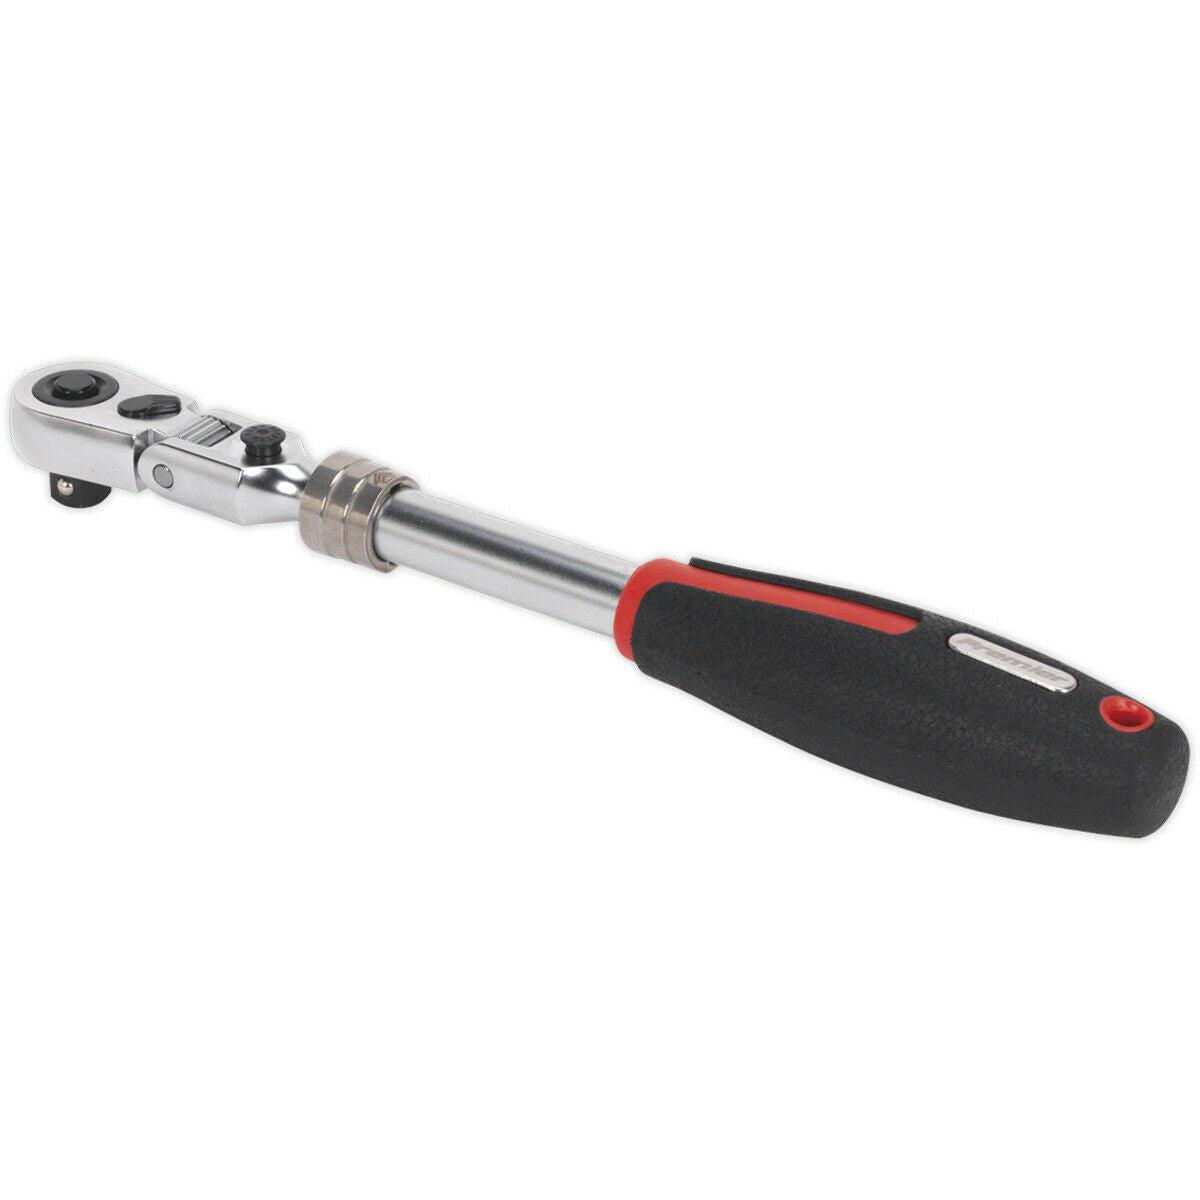 Extendable Ratchet Wrench - 3/8